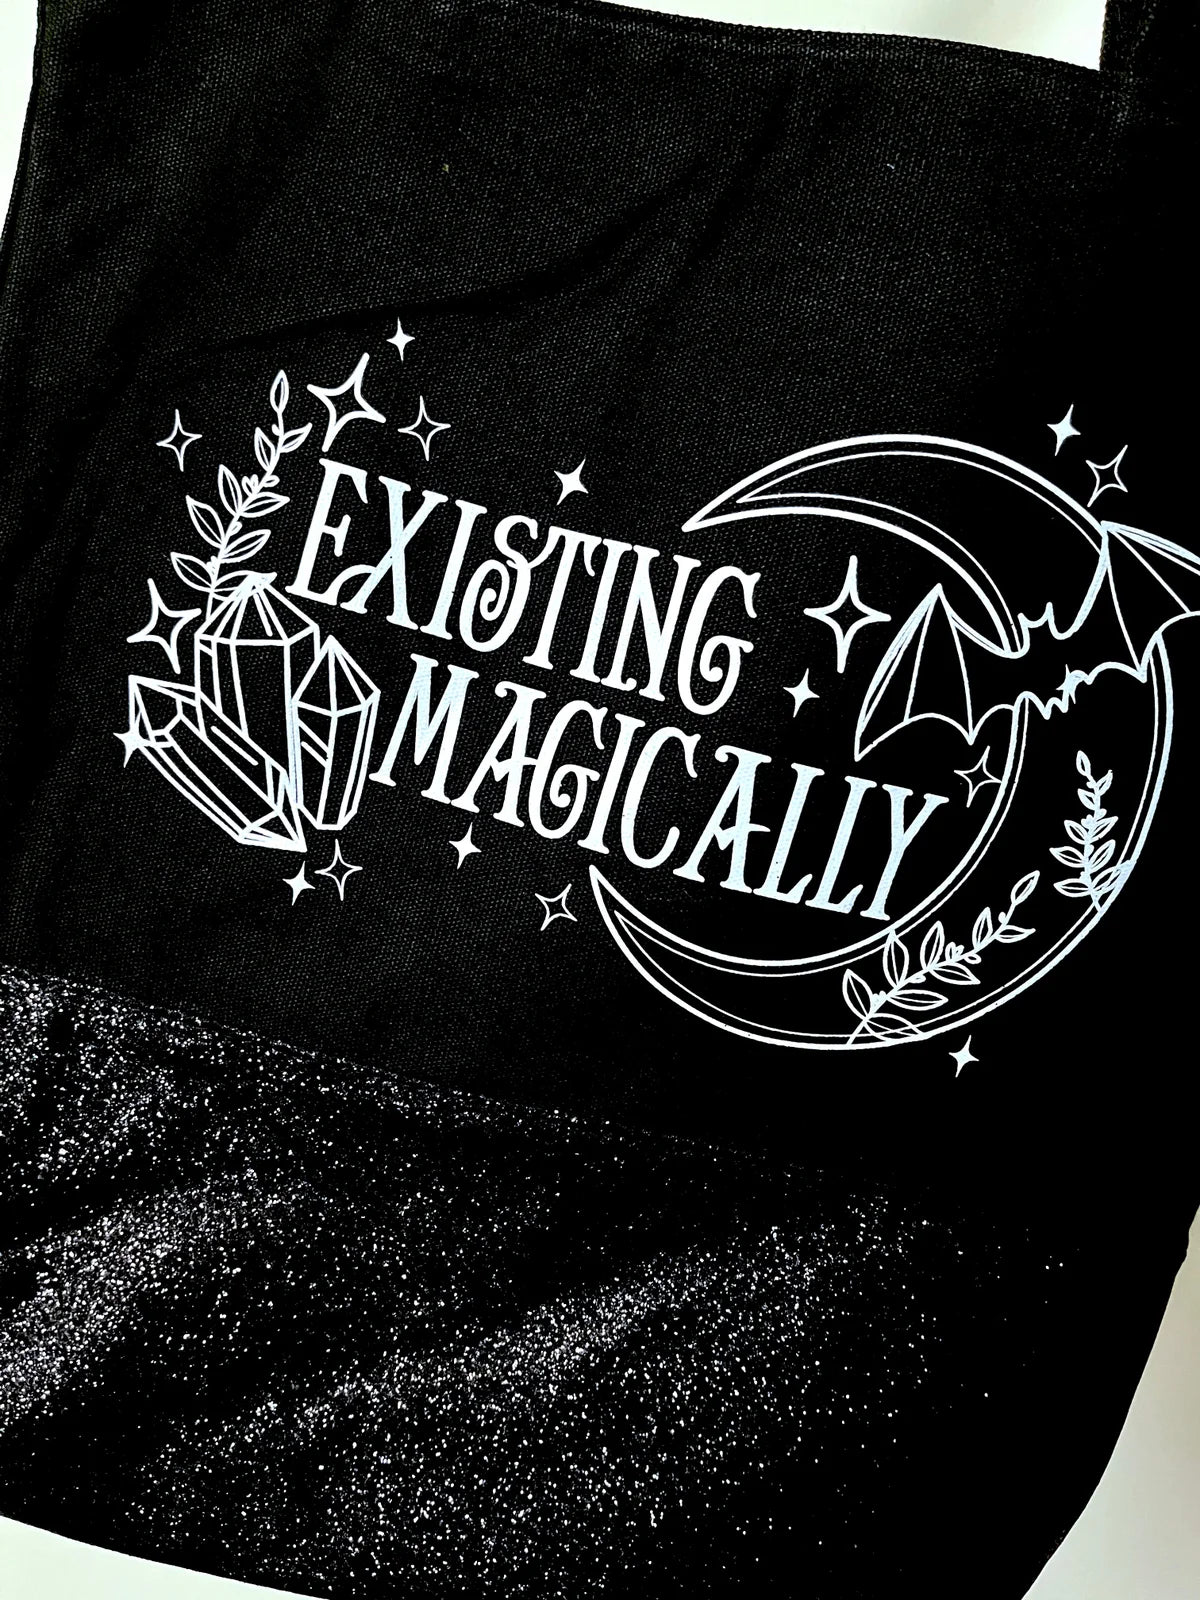 "Existing Magically" Tote Bag